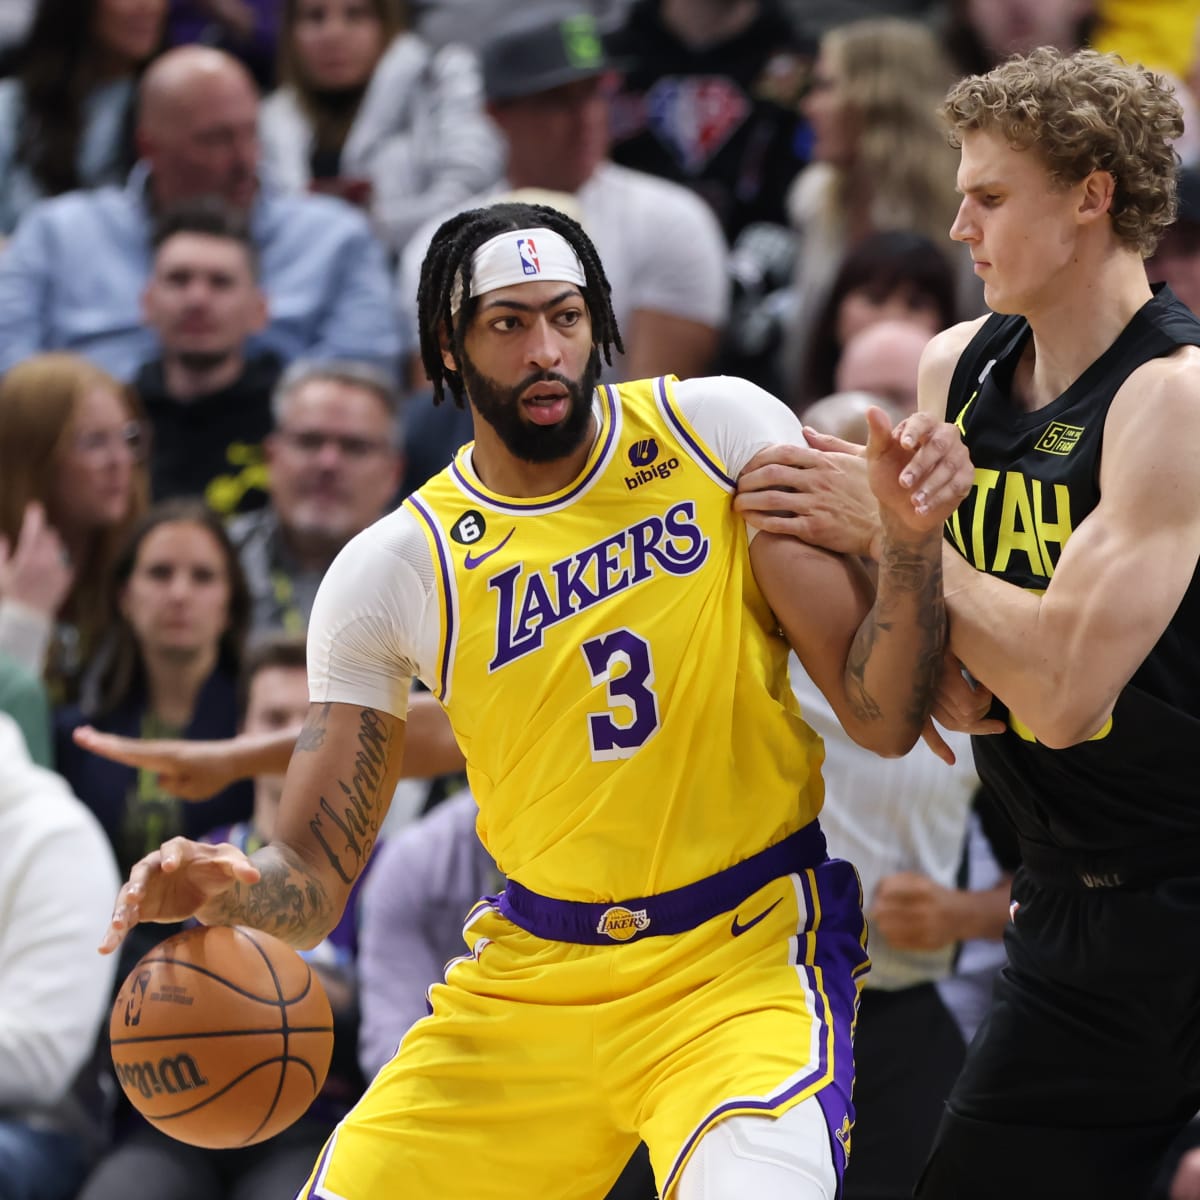 Los Angeles Lakers knocked out of play-in tournament (Again) by Jazz